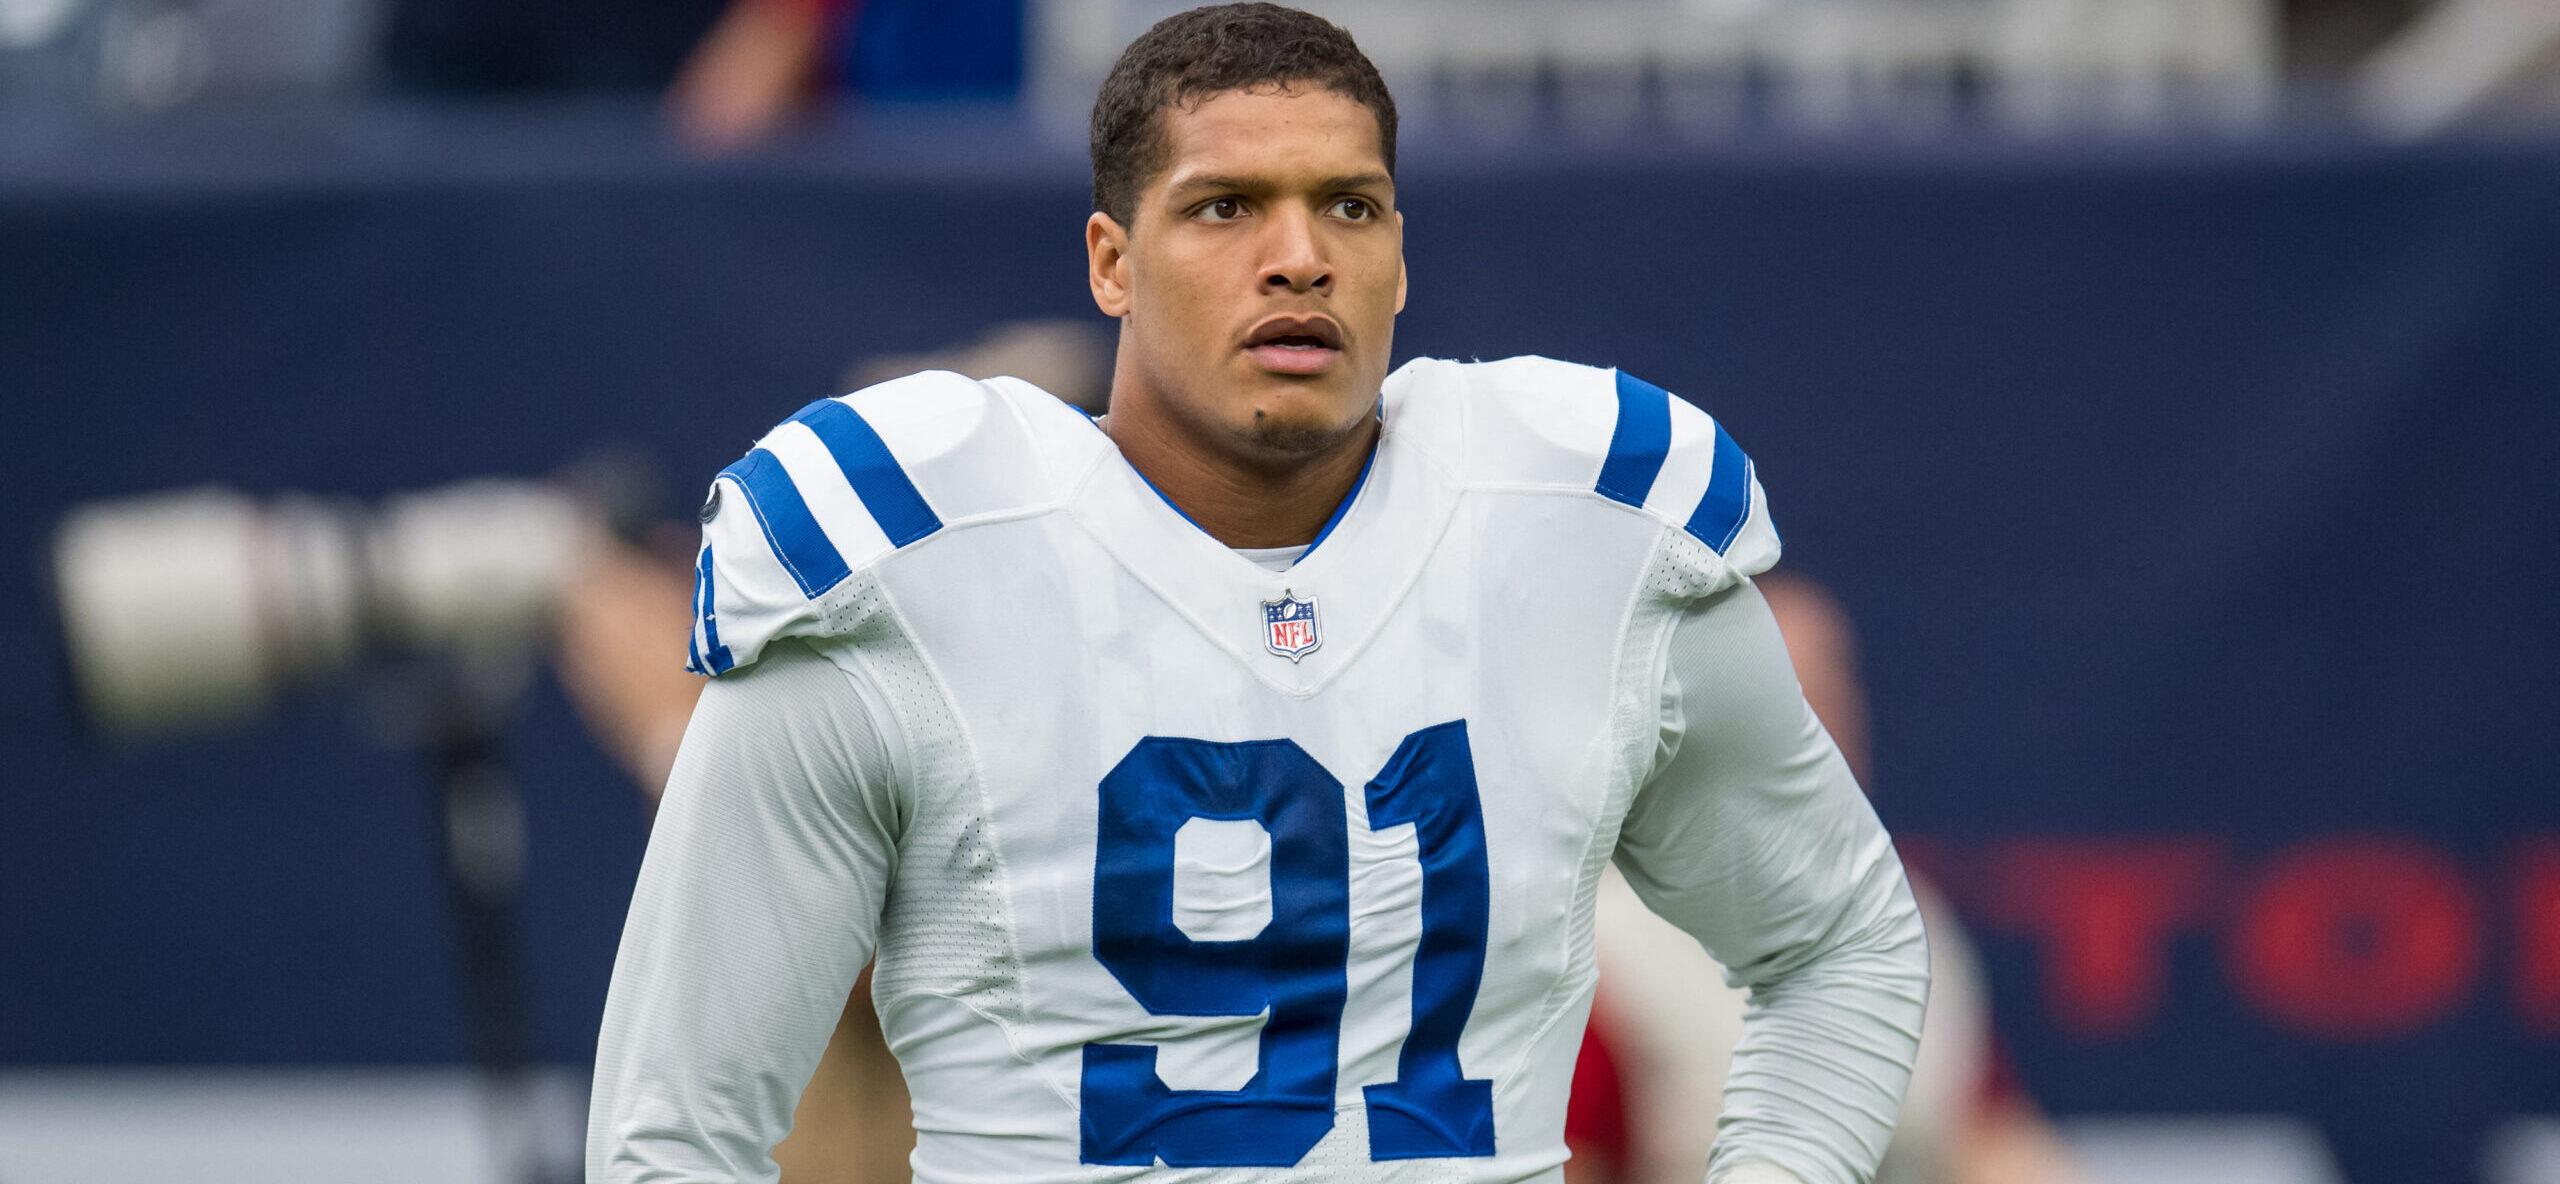 NFL Player Isaac Rochell Claps Back At Harrison Butker: ‘In My Homemaker Era’